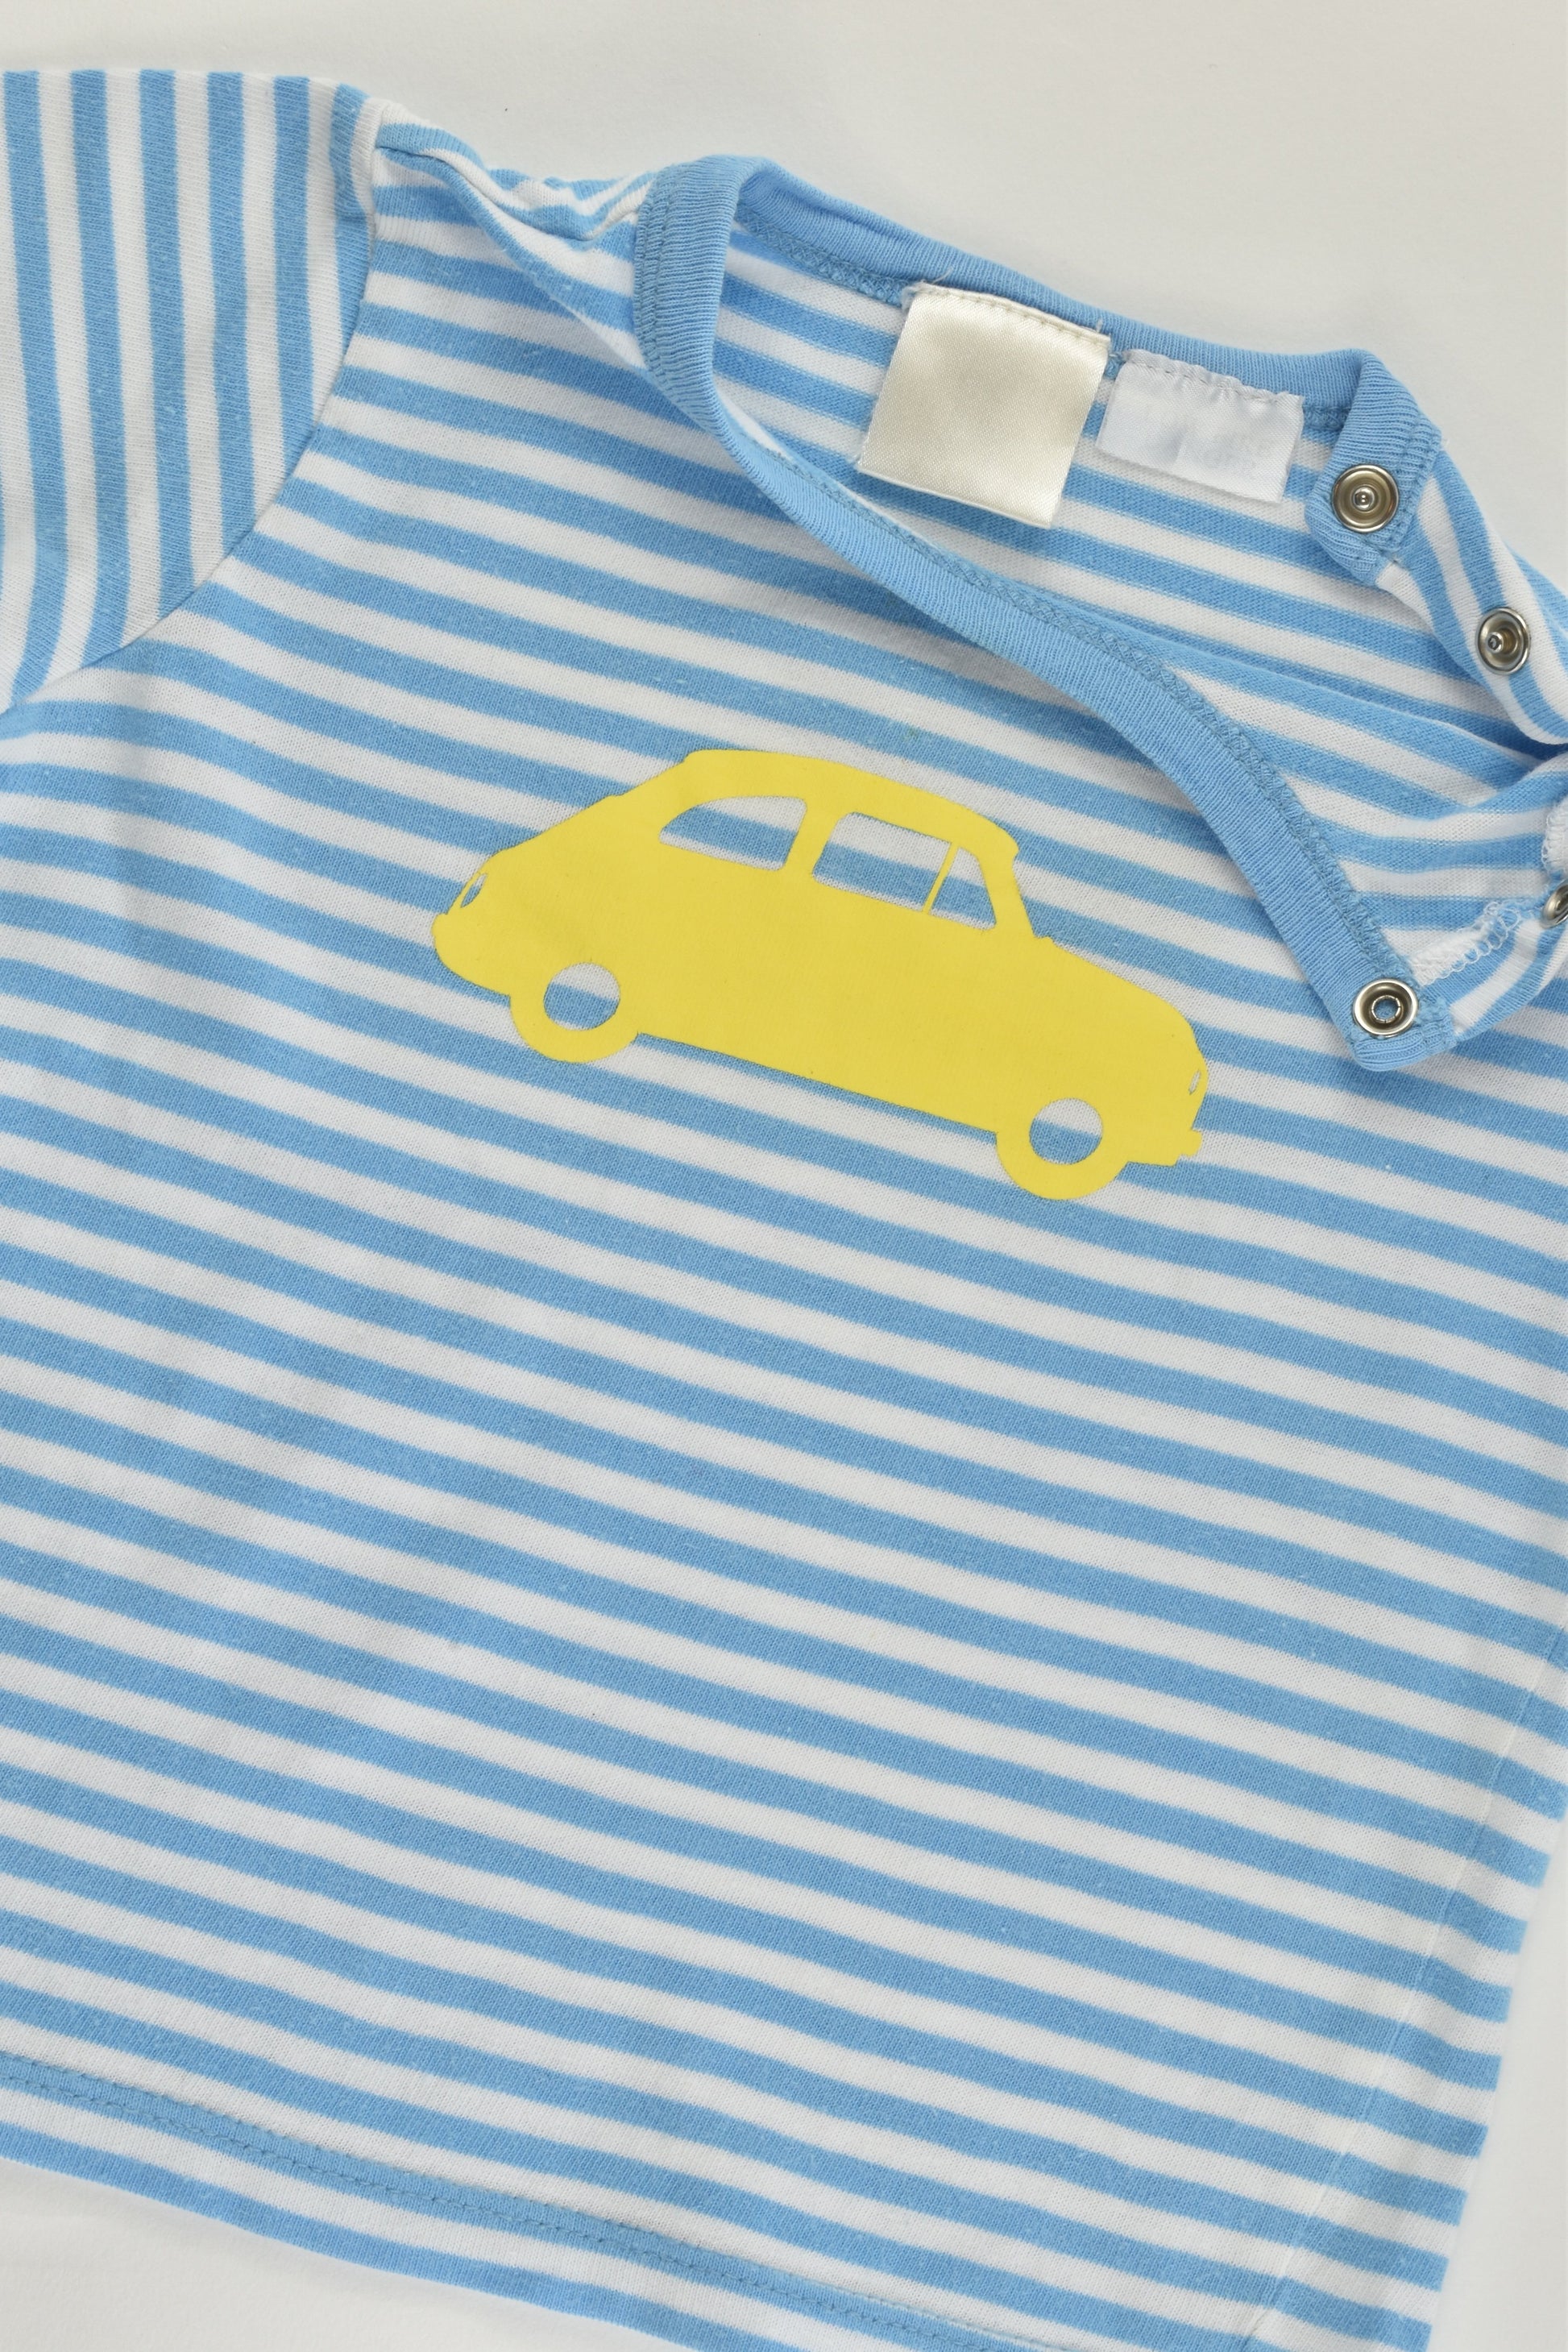 Seed Size 00 (3-6 months) Striped Car T-shirt